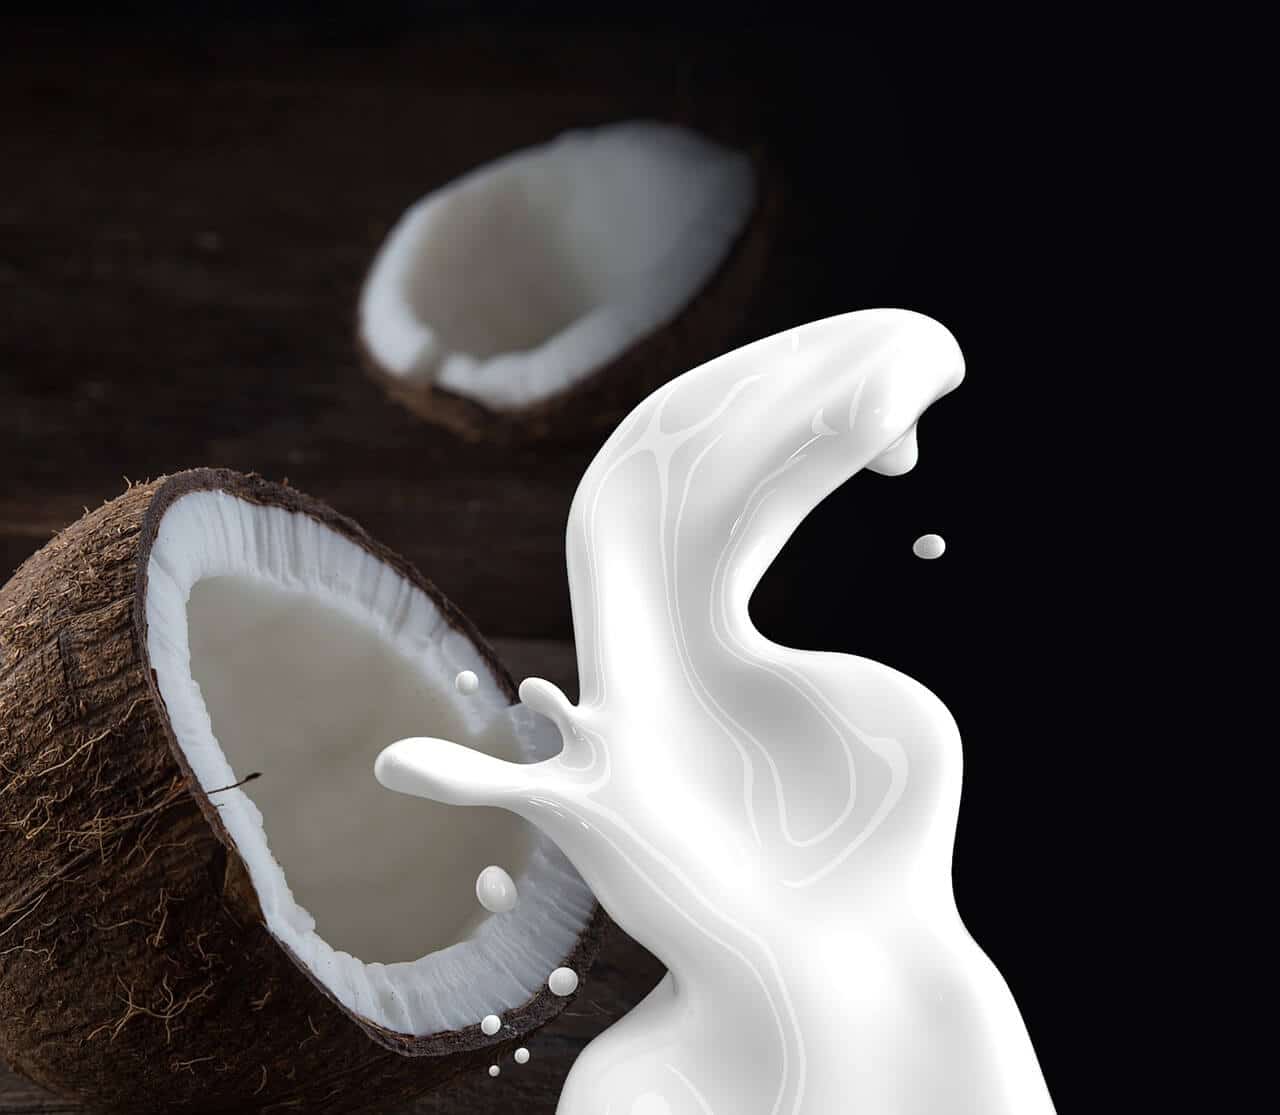 Opened coconuts with a splash of milk in front.